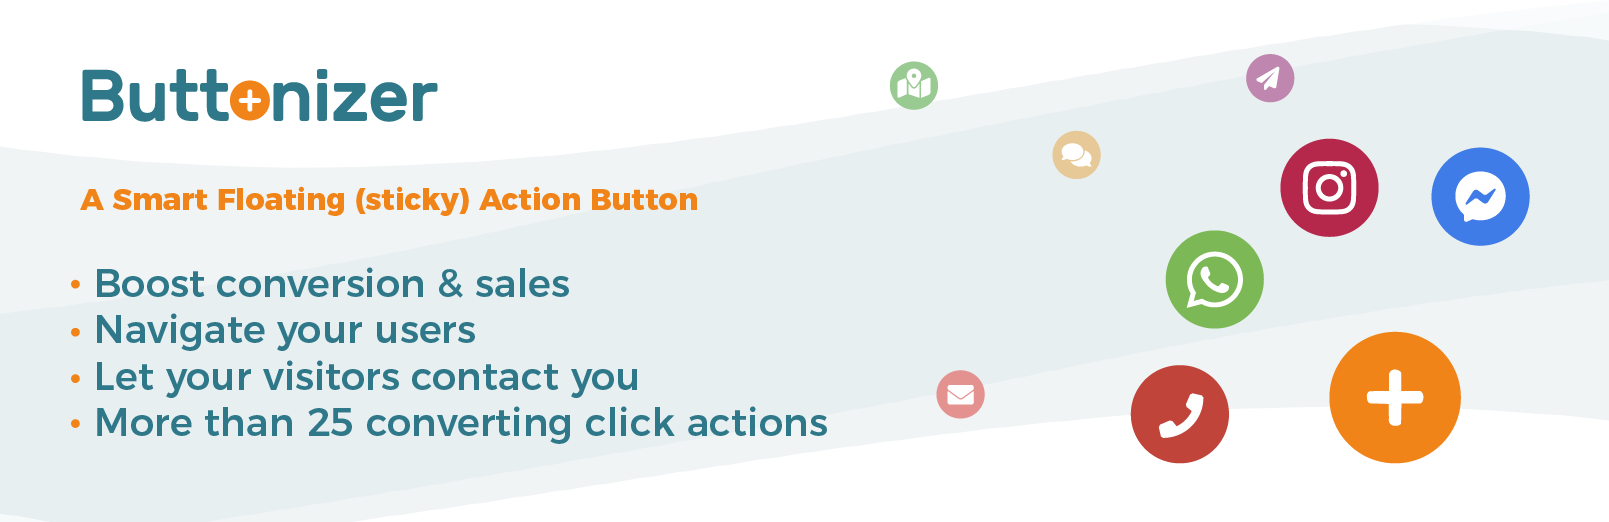 Smart Floating / Sticky Buttons — Call, Sharing, Chat Widgets & More – Buttonizer